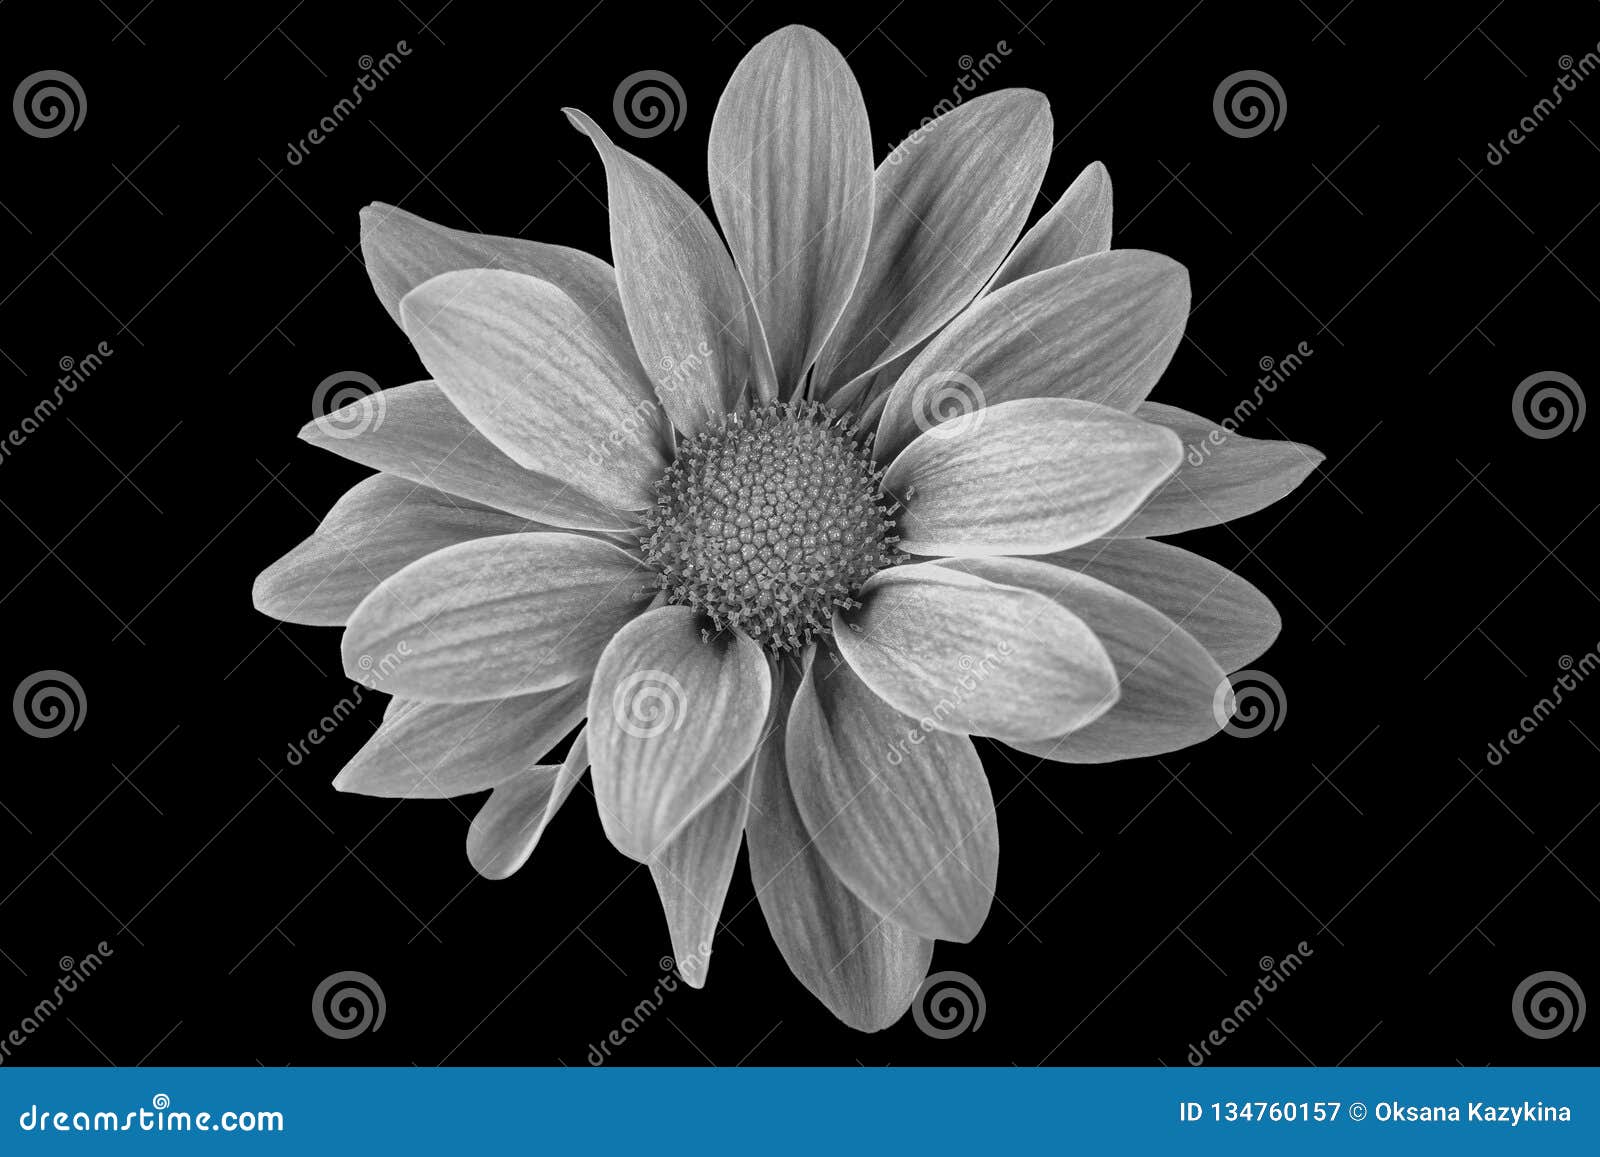 Black and White Flower in Isolation on a Black Background. for Designers  Stock Image - Image of floral, artistic: 134760157